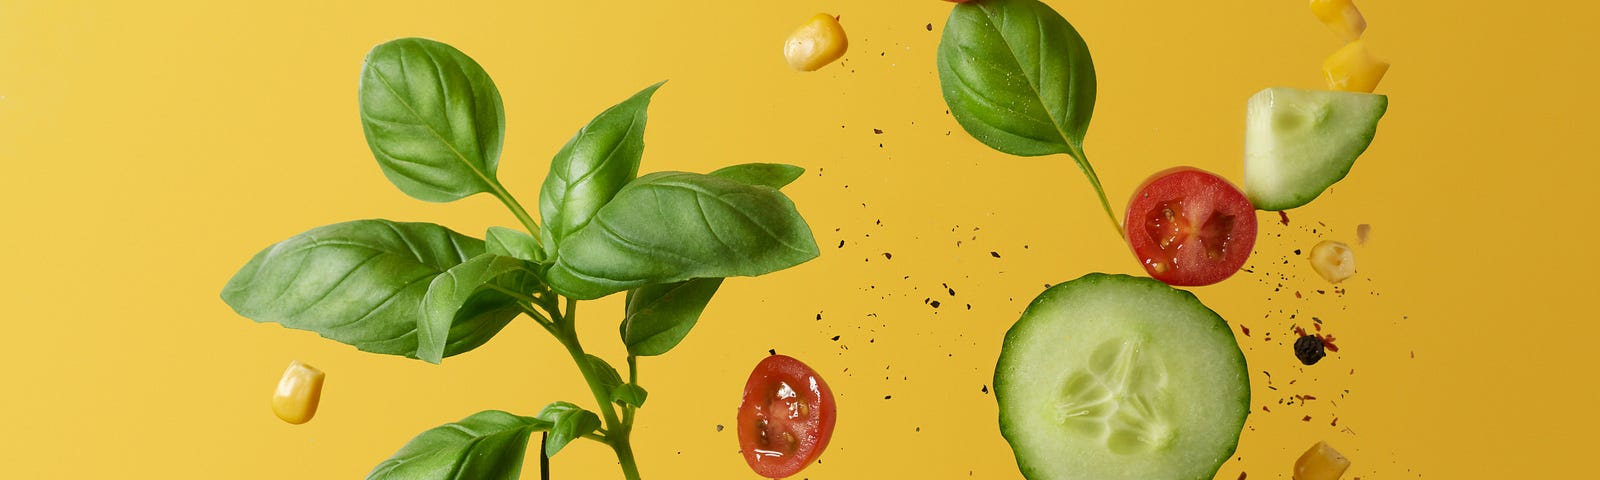 Photograph of avocado, tomatoes, and herbs falling on a yellow background. Healthy eating. Weight loss